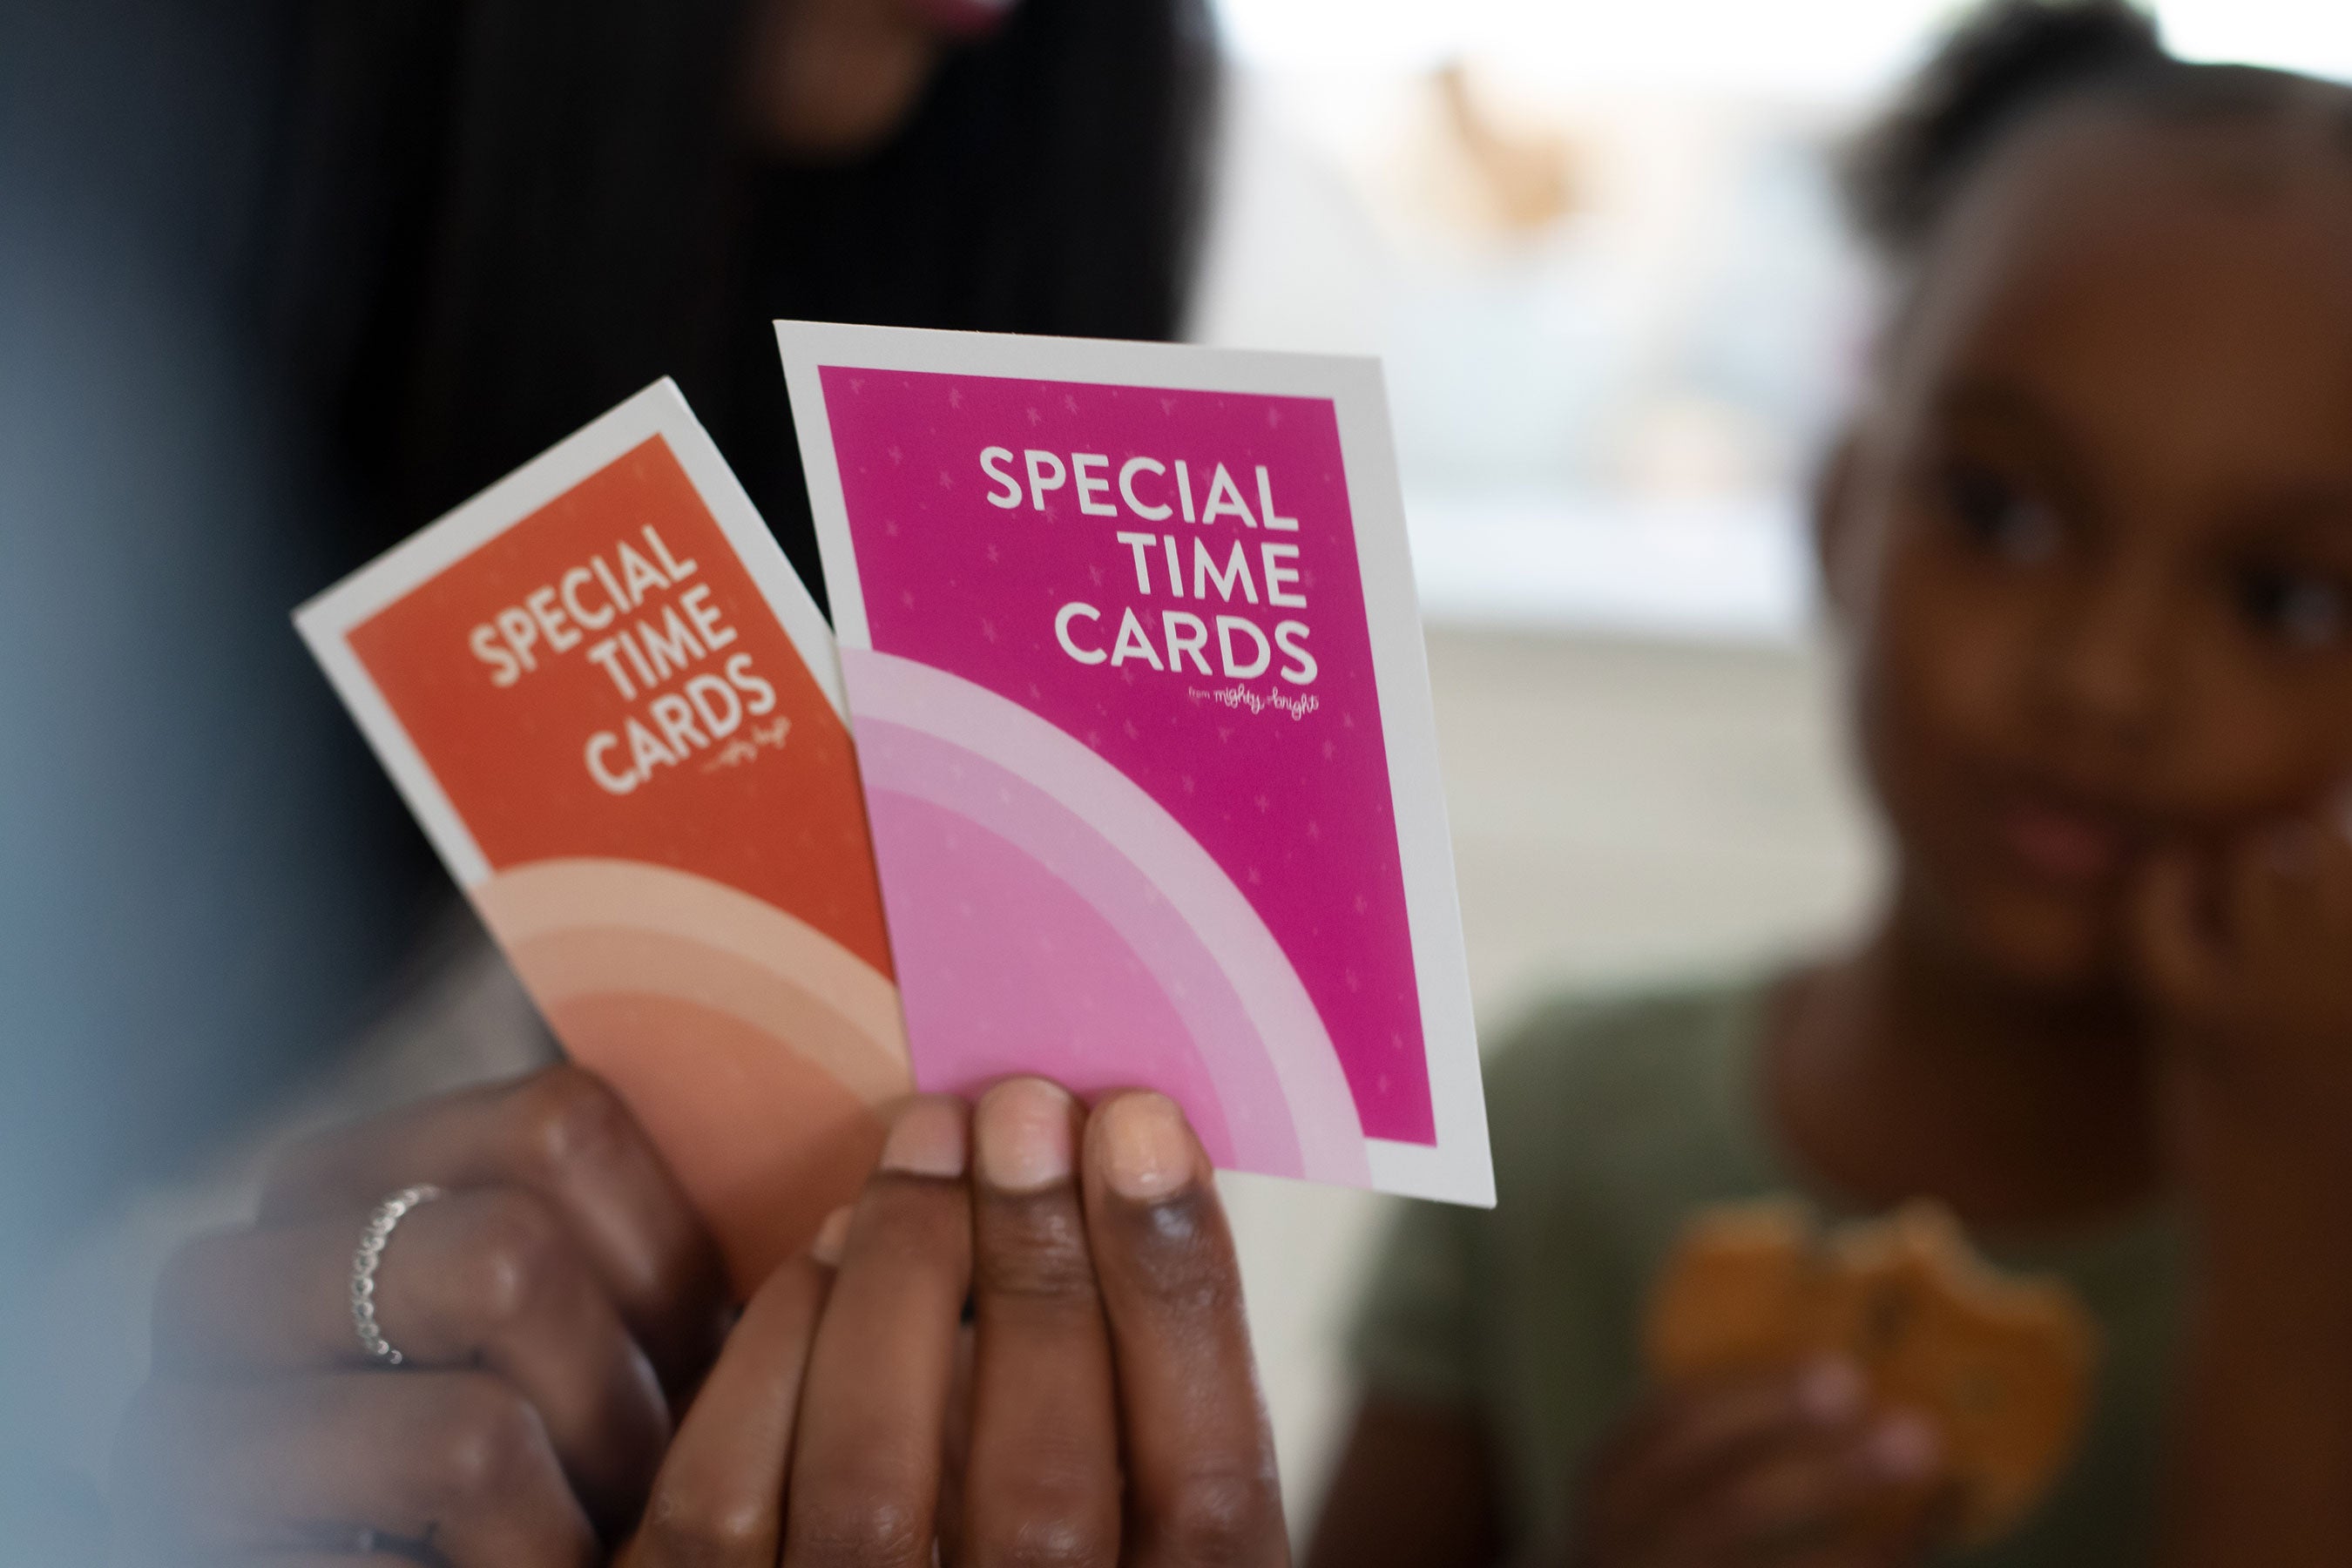 Mom holds Special Time Cards while young girl looks on